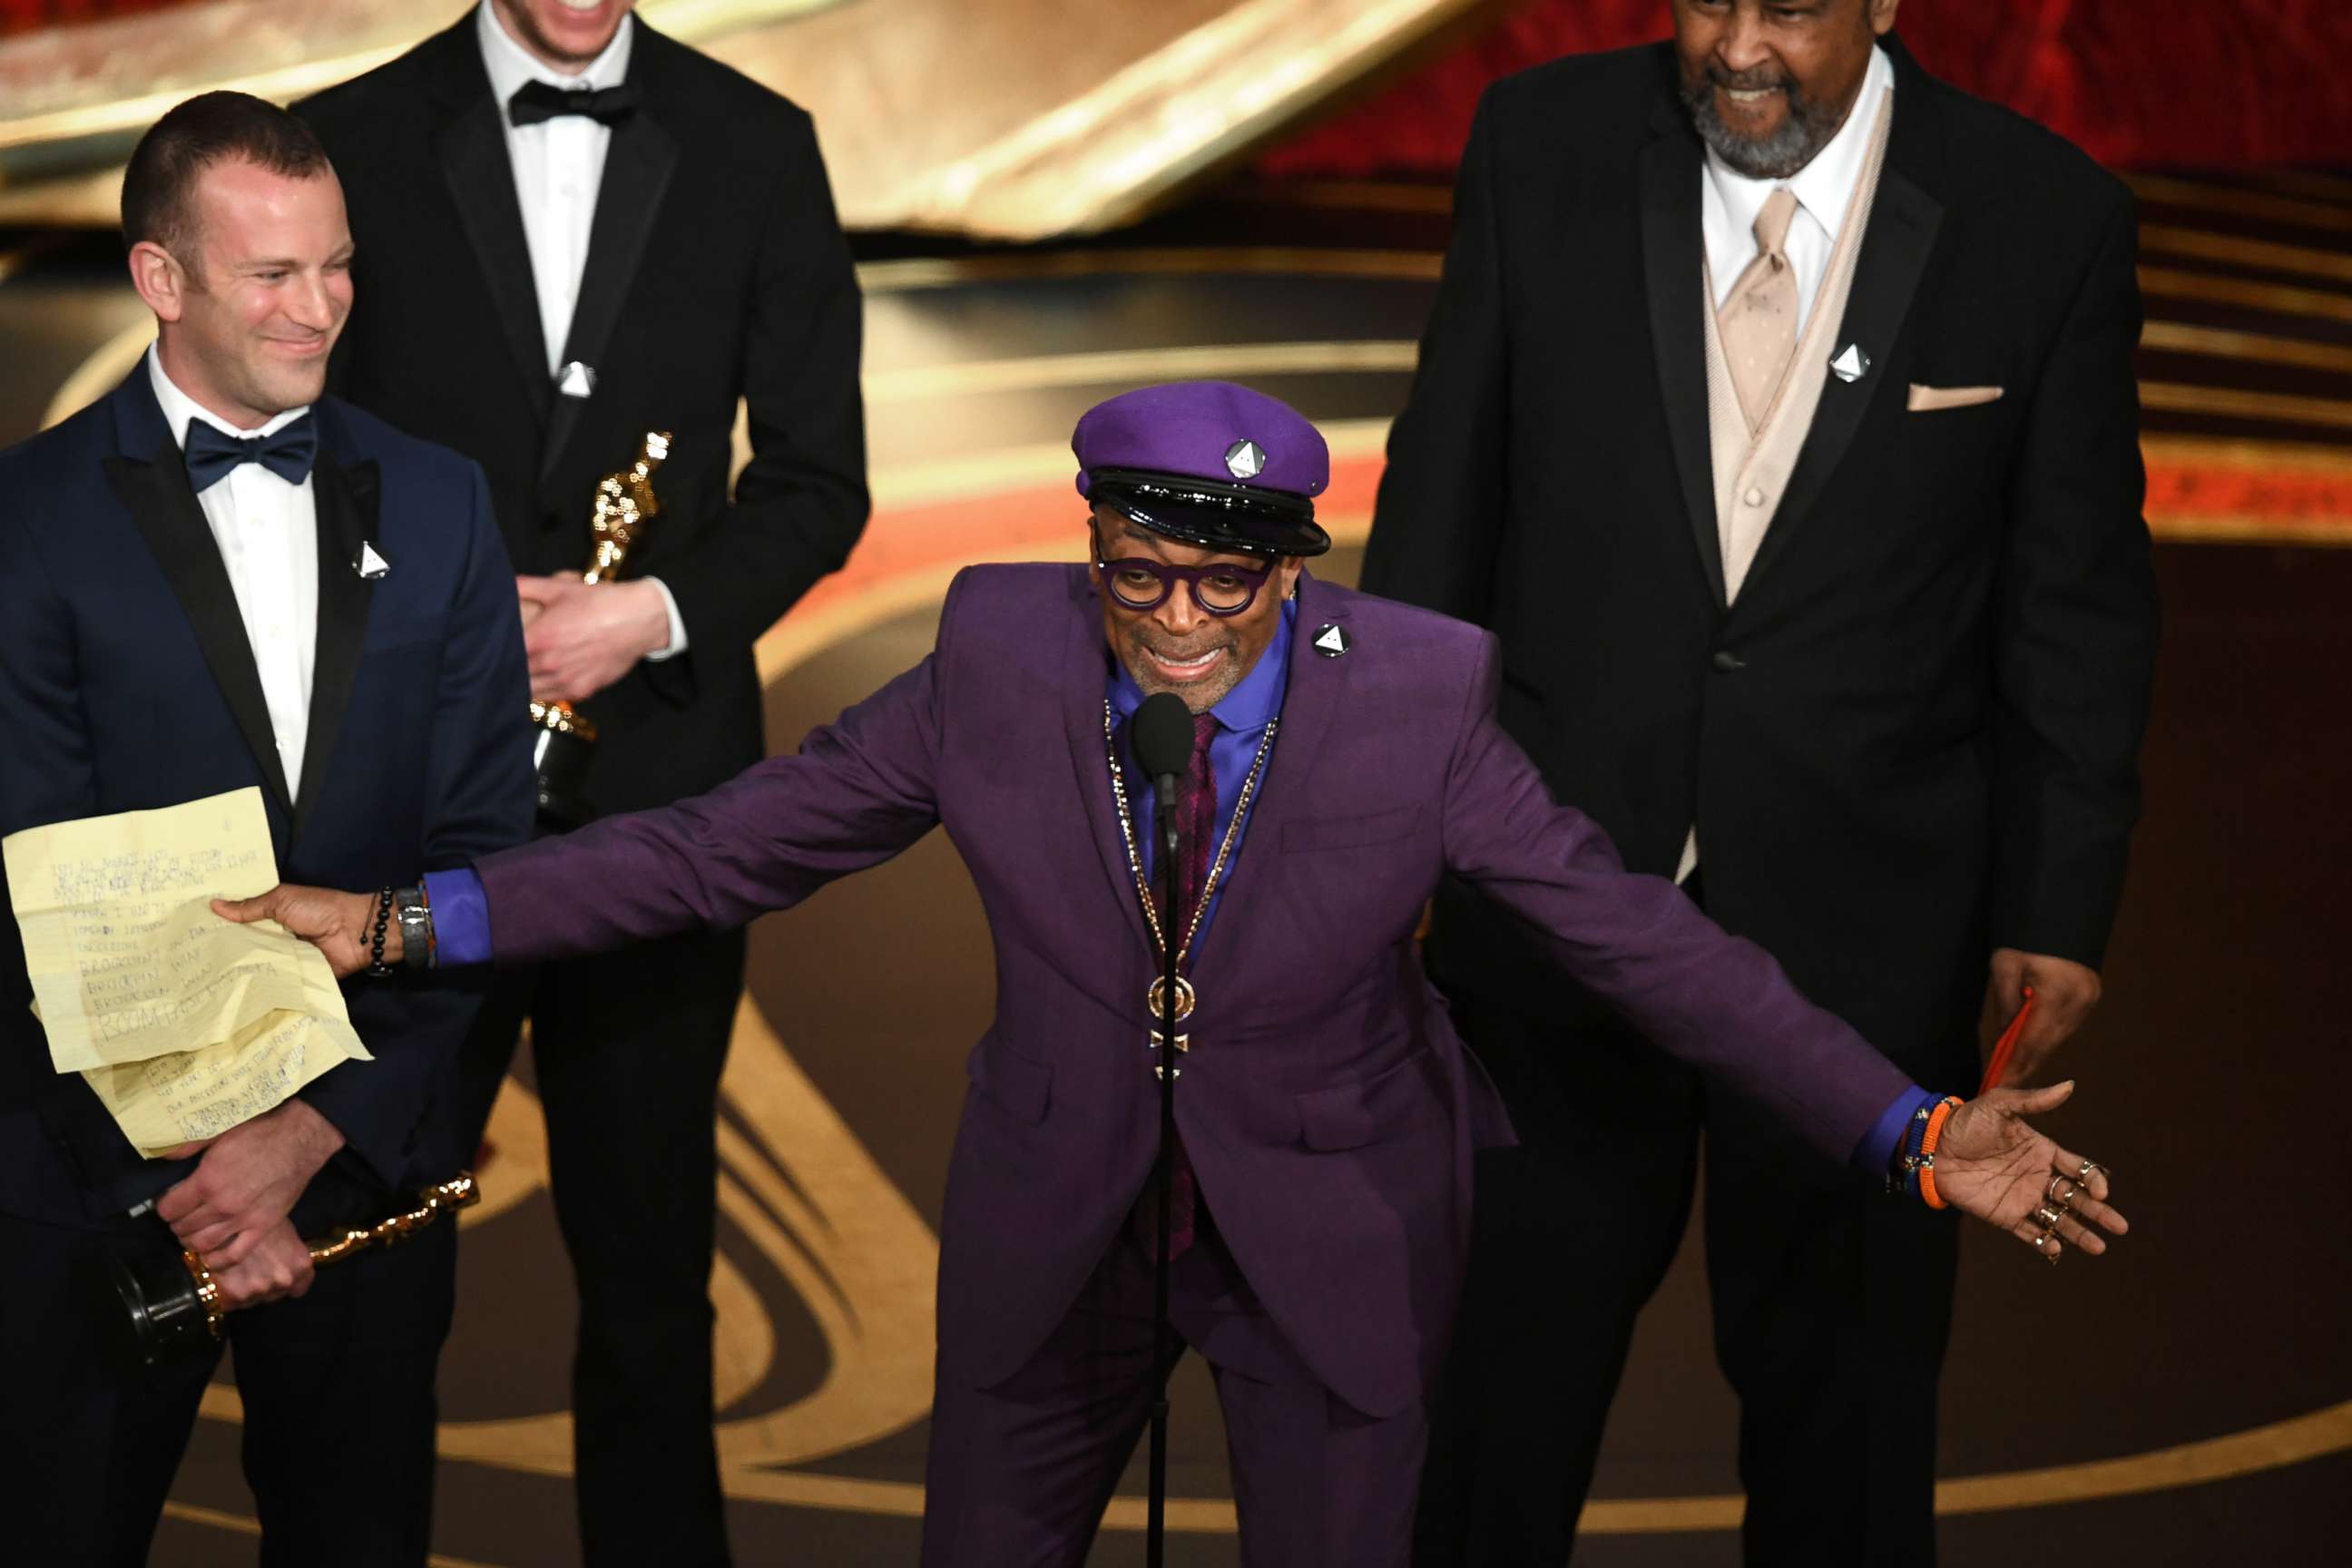 PHOTO: Spike Lee accepts the Oscar for adapted screenplay for 'BlacKkKlansman' onstage during the 91st Annual Academy Awards at Dolby Theatre, Feb. 24, 2019 in Hollywood, Calif.